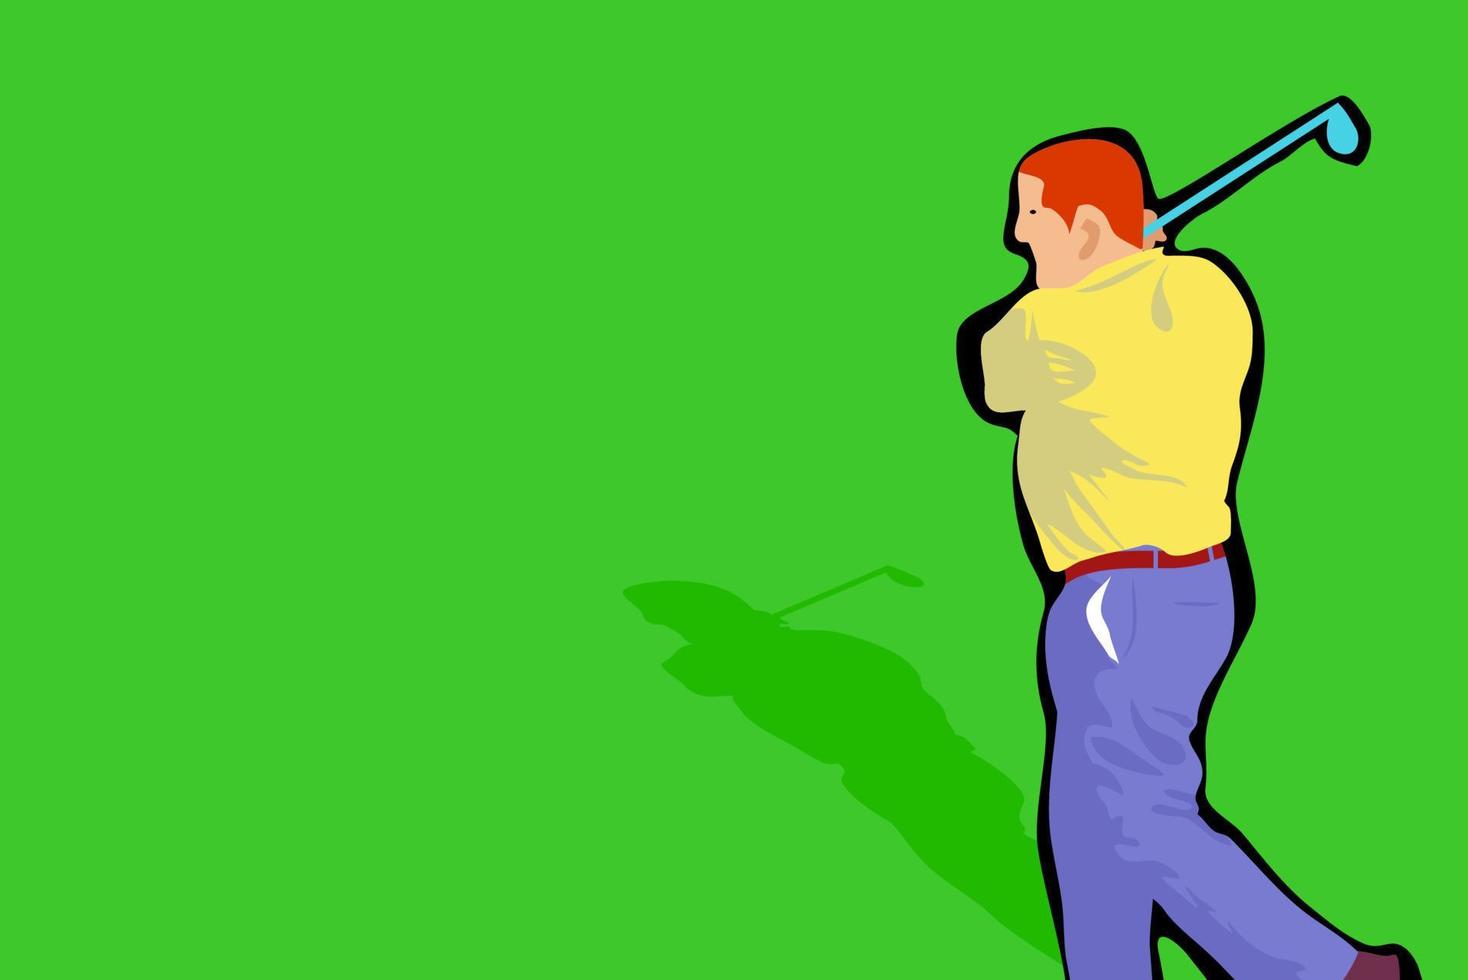 Club Swinging Golf Player in Action vector